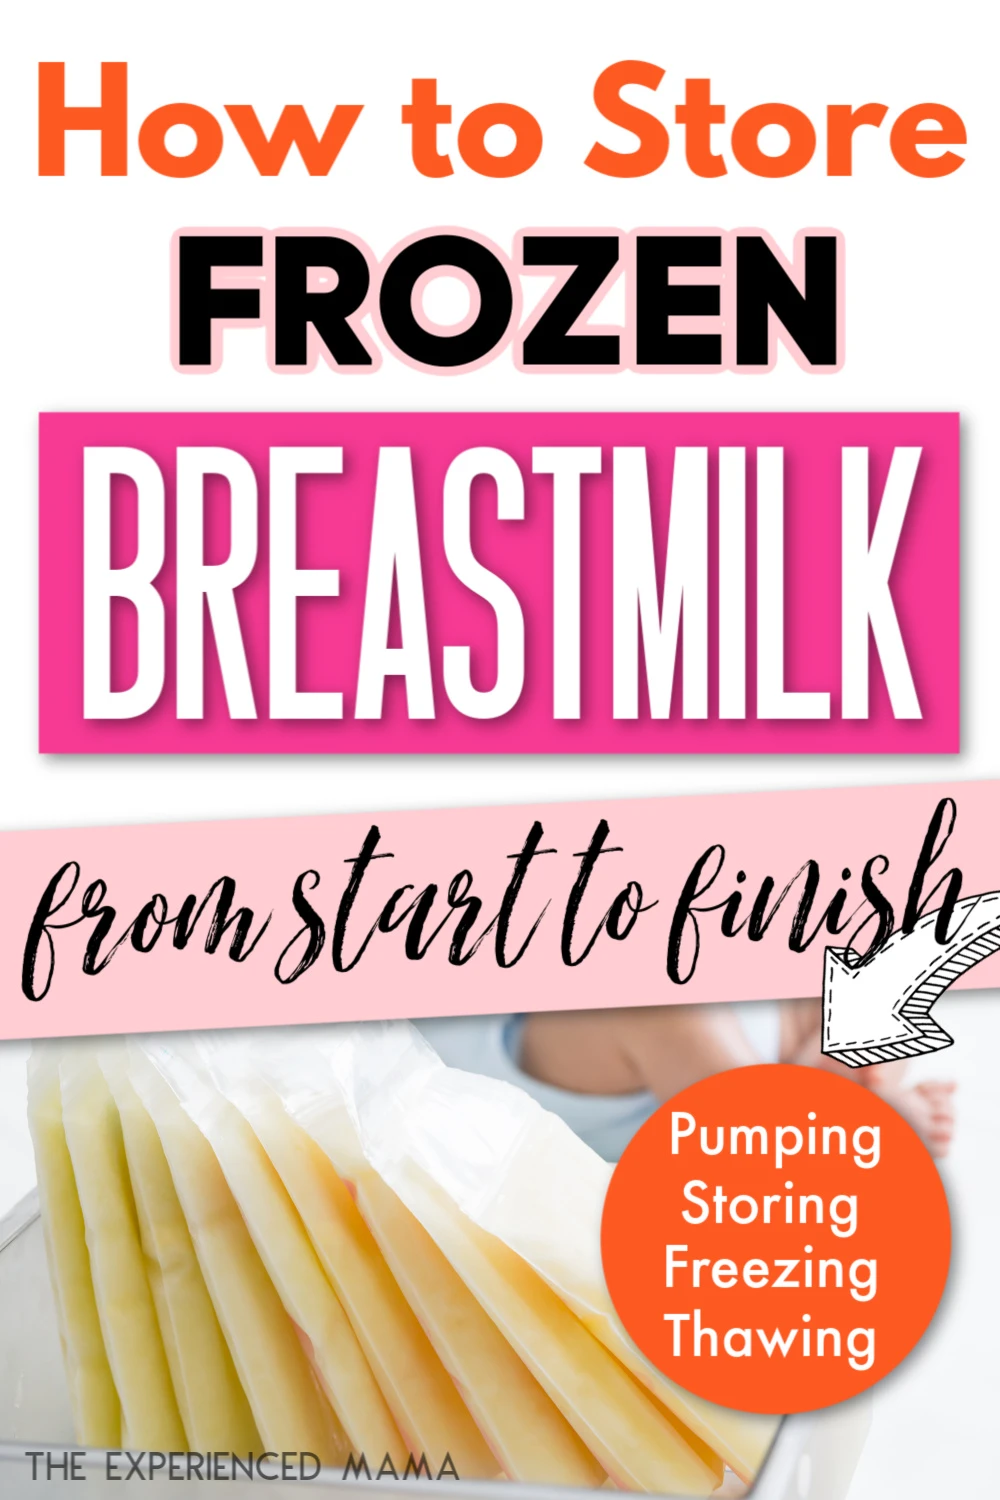 frozen breastmilk bags sitting upright in container with text overlay "How to Store Frozen Breastmilk from start to finish"